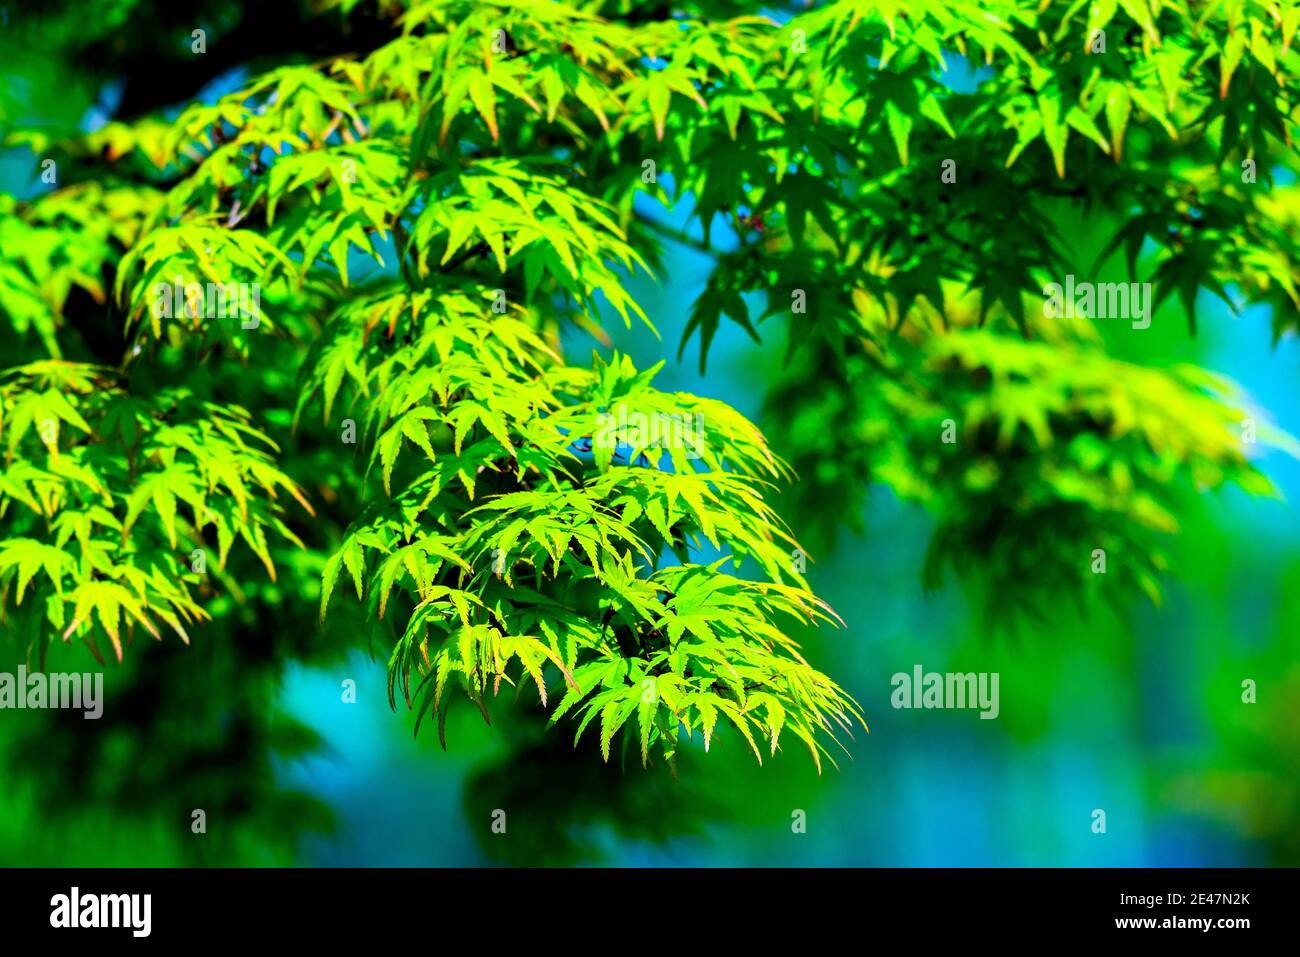 Acer palmatum or Palm-shaped maple budding in the spring. Leaves of tree on sunlight. Stock Photo